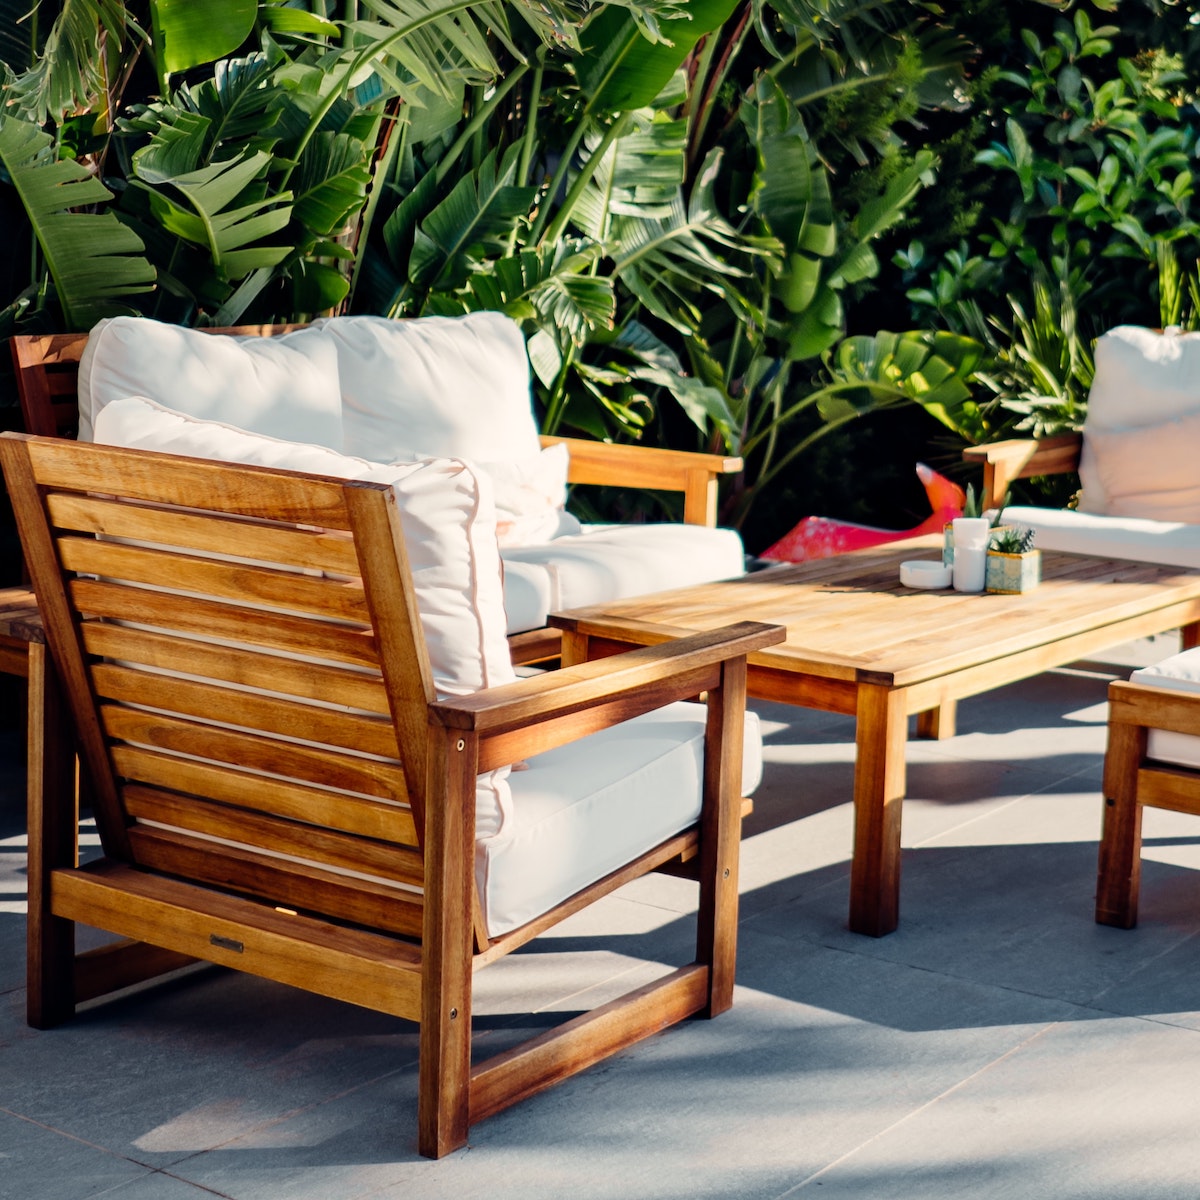 How to clean wood outdoor furniture